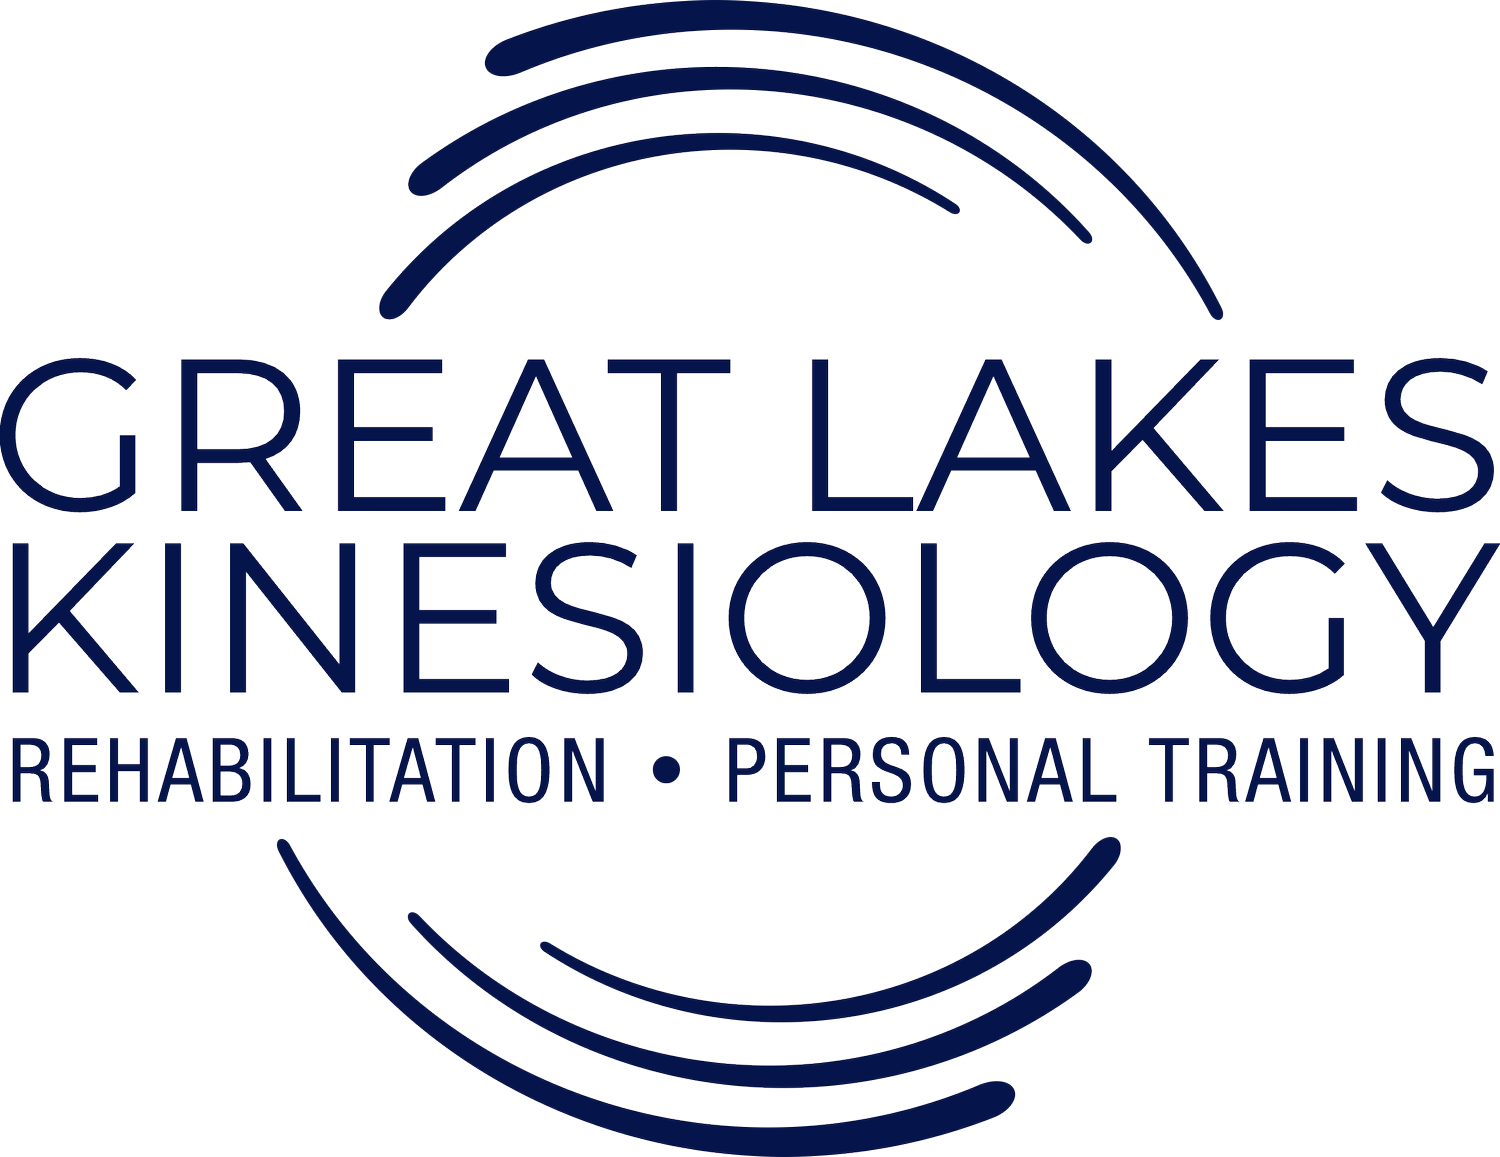 Great Lakes Kinesiology